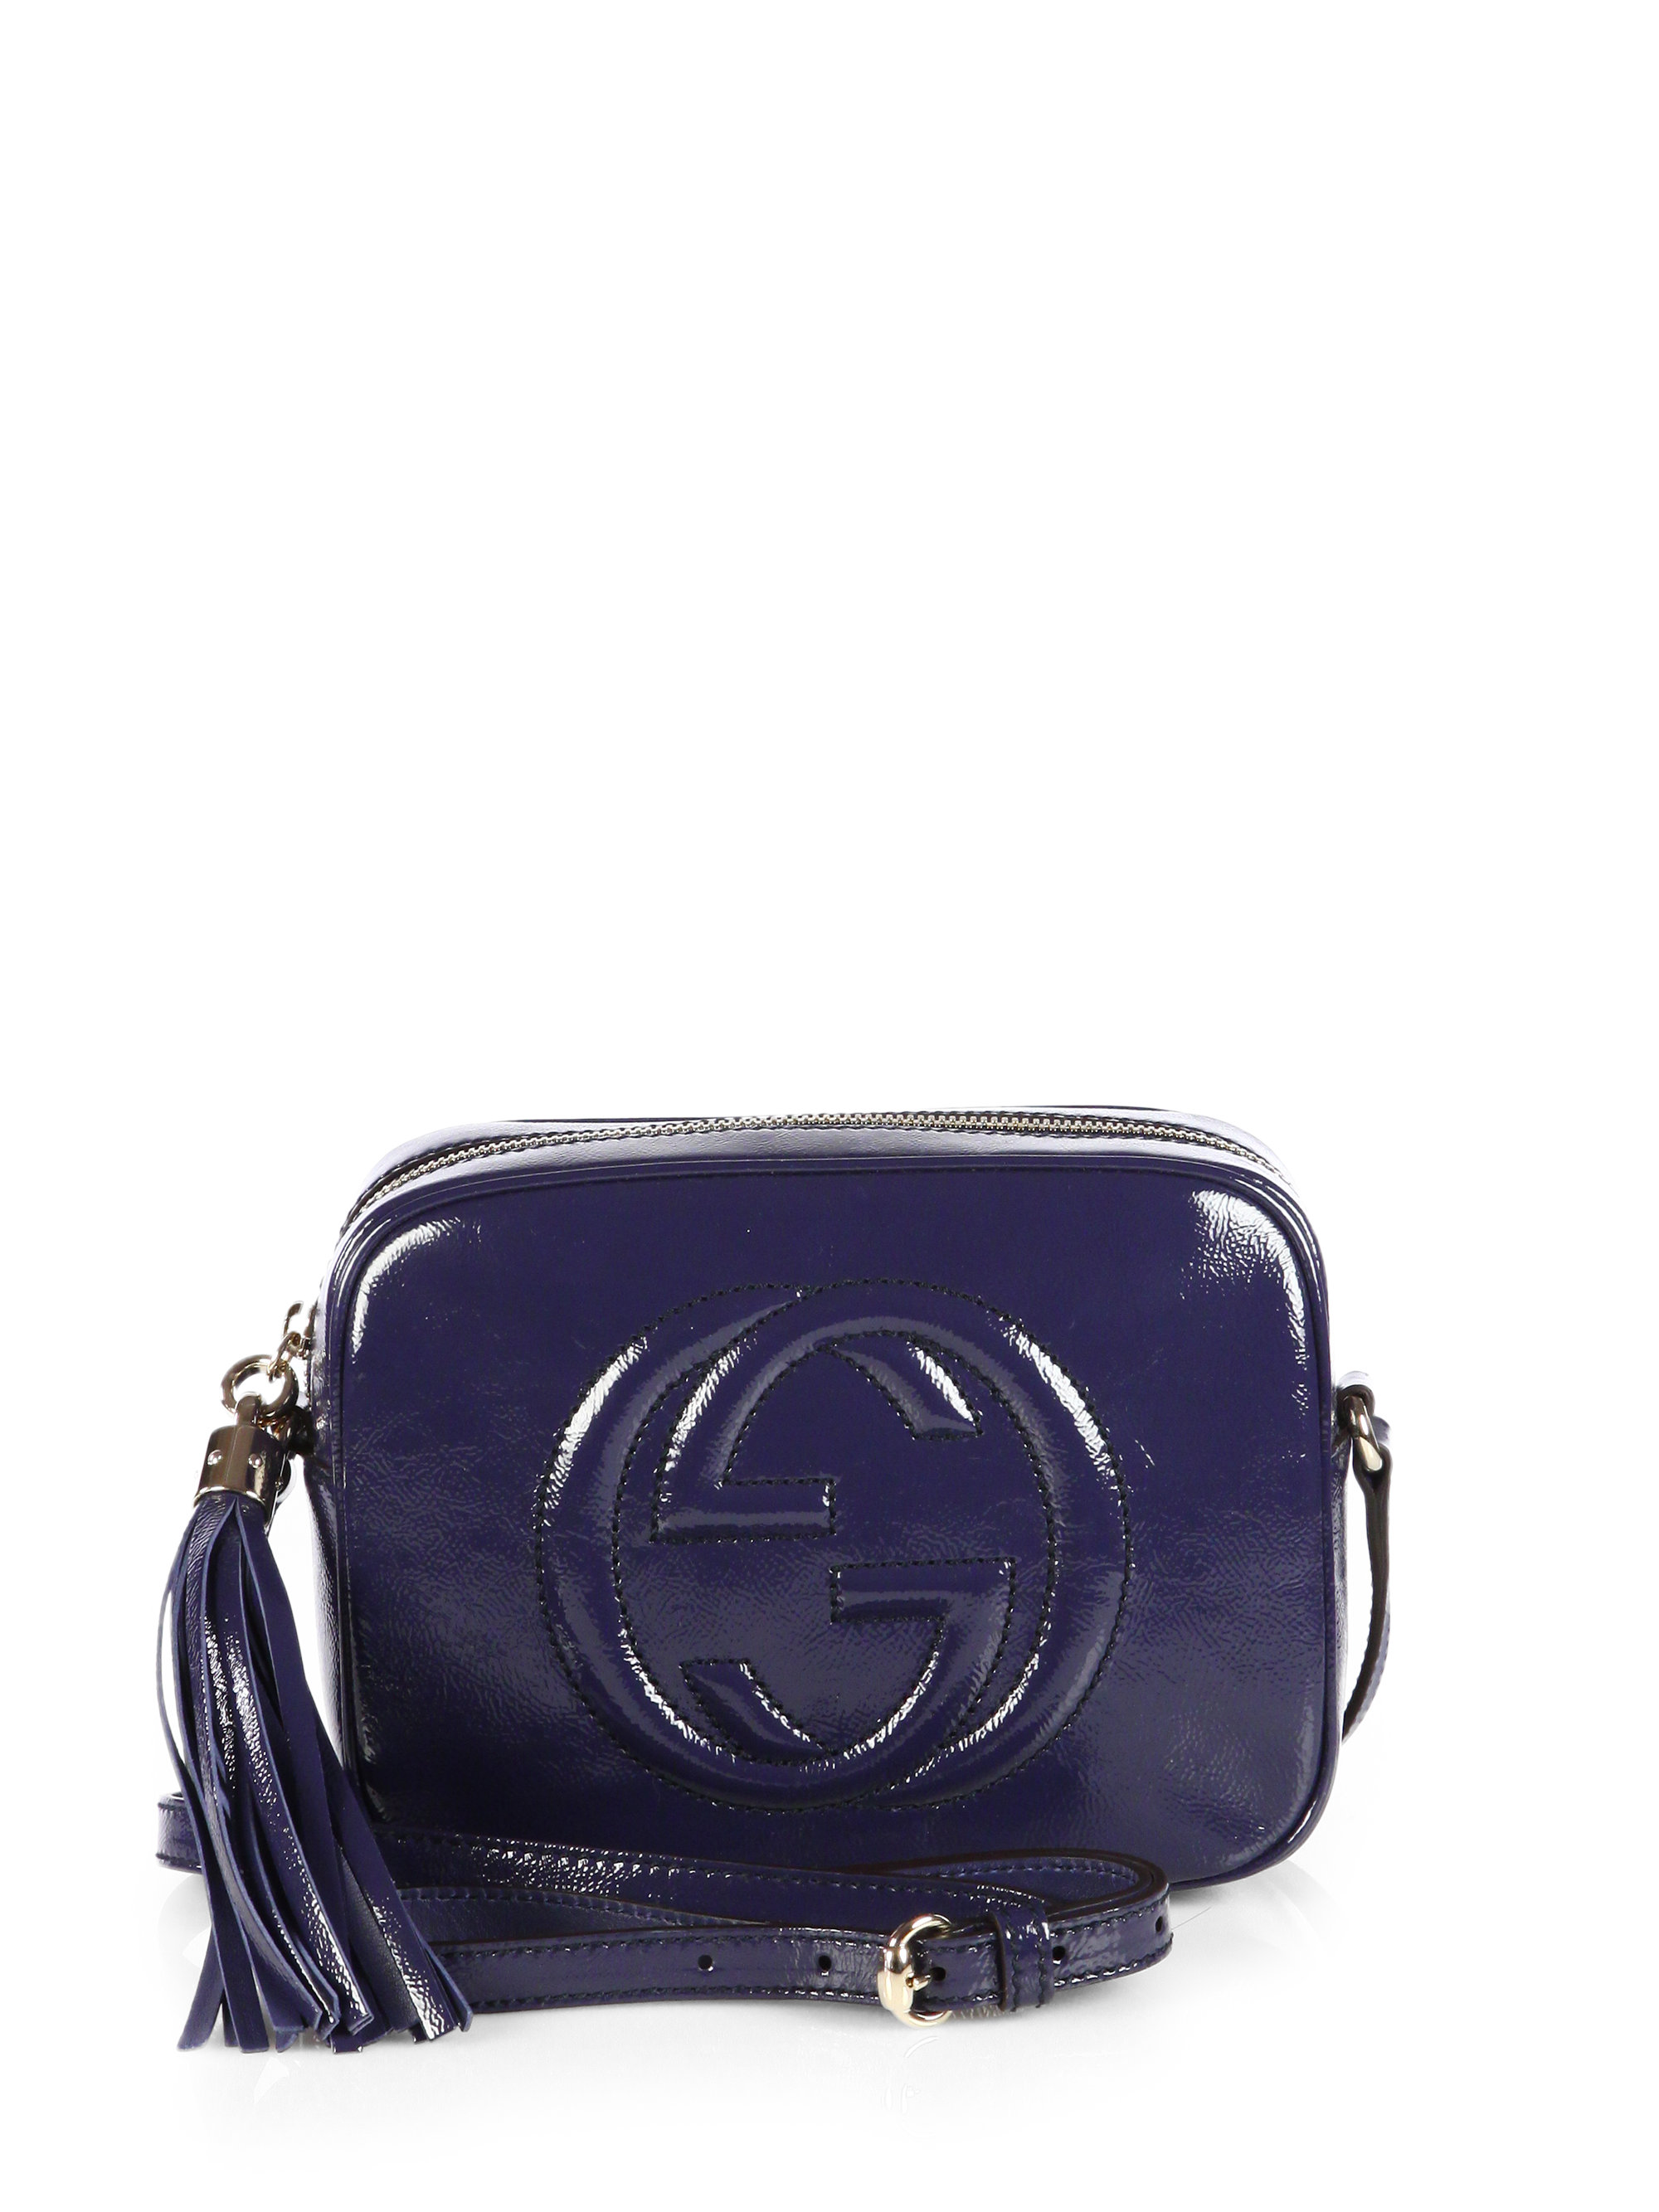 Gucci Soho Patent Leather Disco Bag in Blue (AZURE) | Lyst  